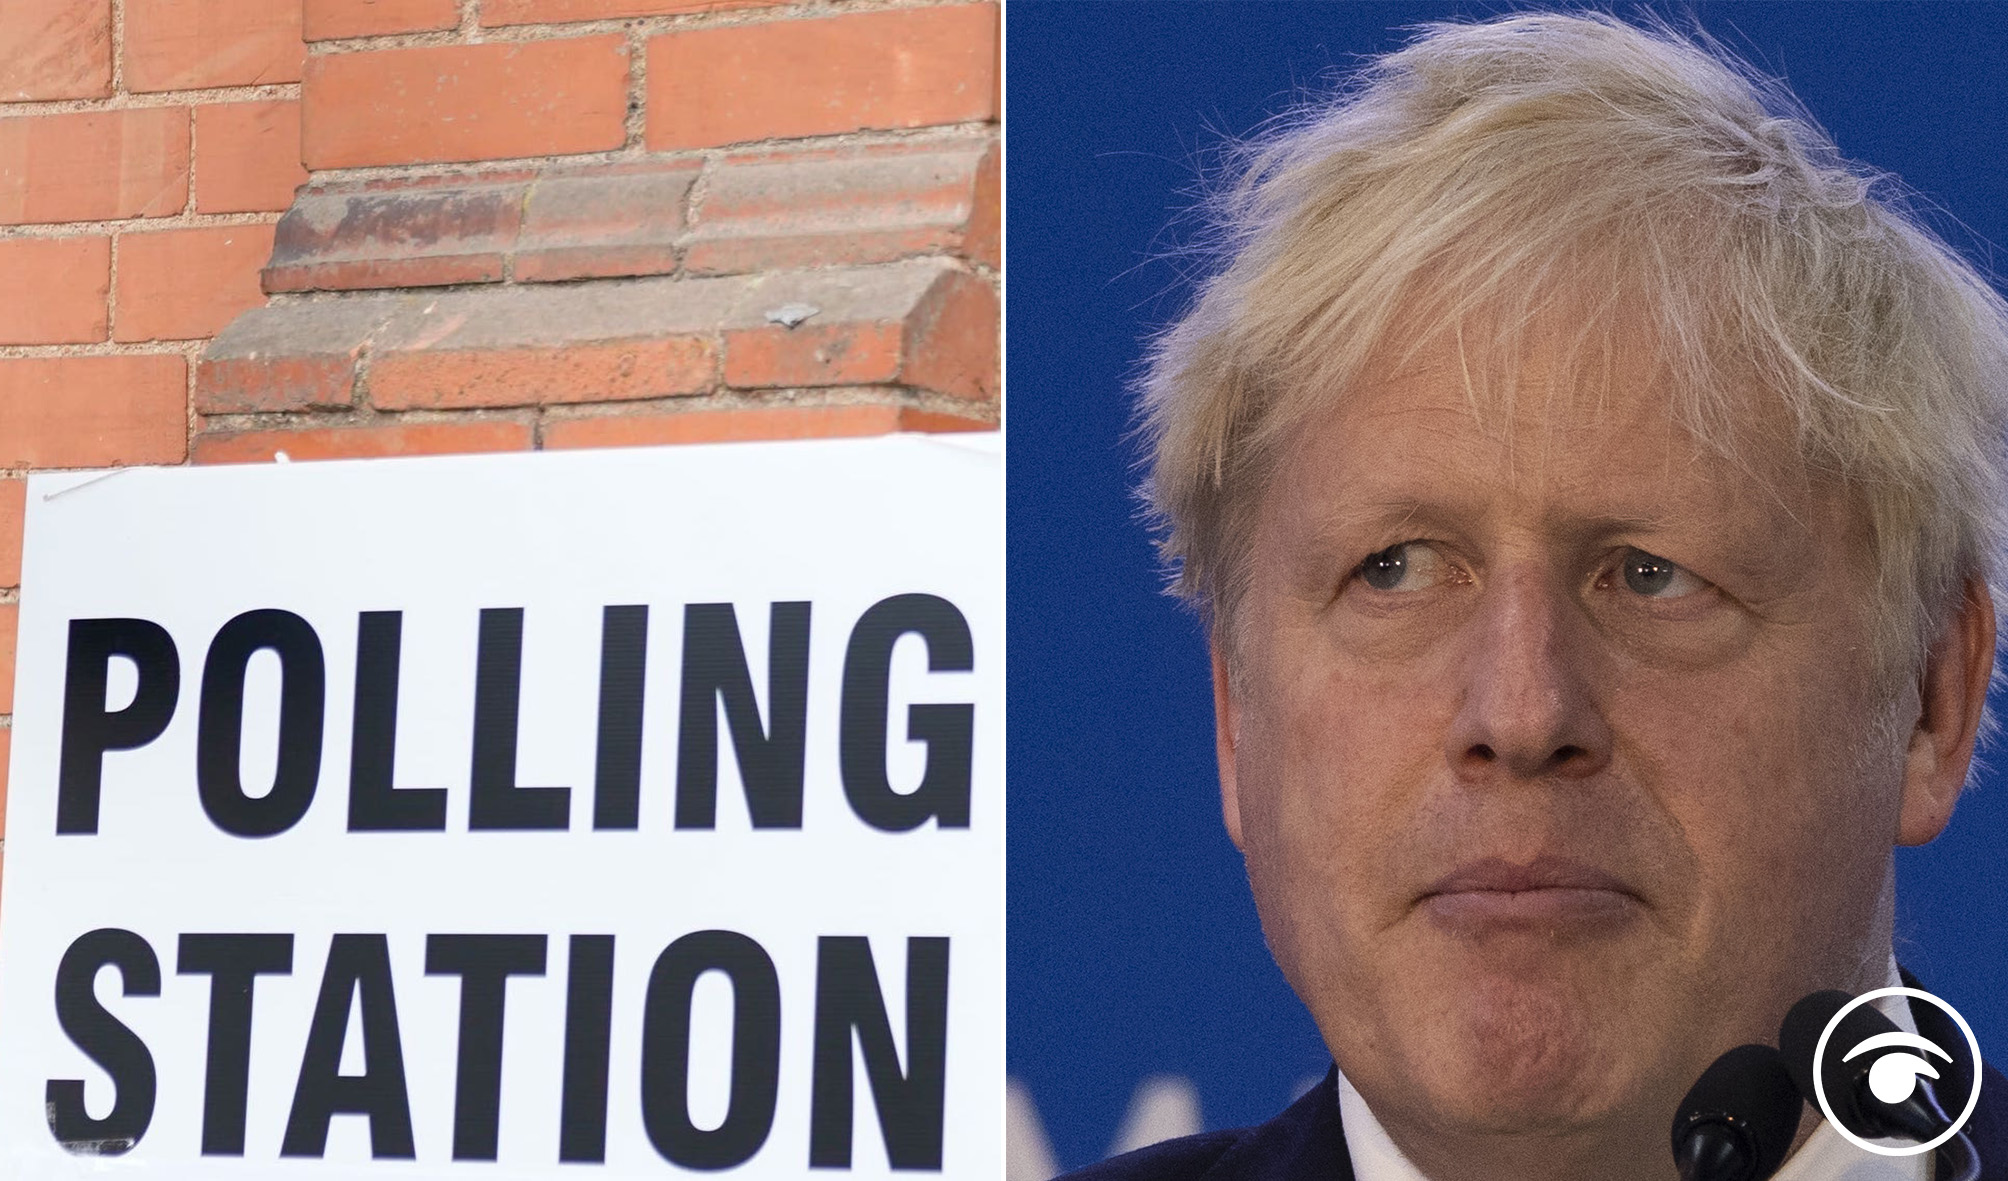 Bye Bye Boris trends but he refuses to leave office after by-election catastrophe -reactions